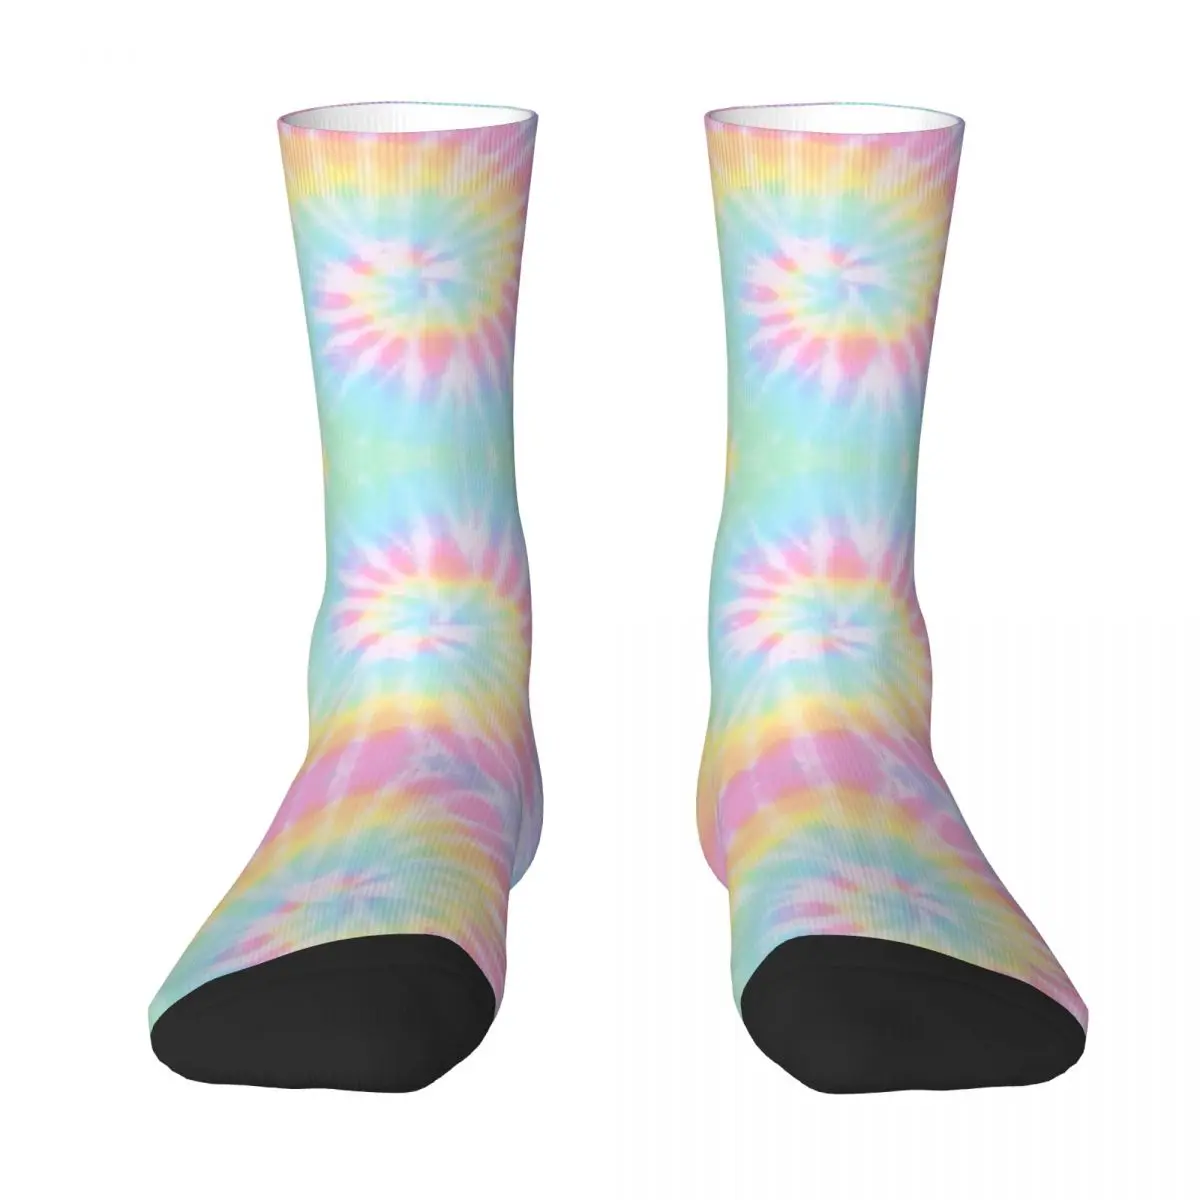 

Graphic Rainbow Tie Dye R92 Stocking The Best Buy Blanket roll Compression SocksFunny Novelty